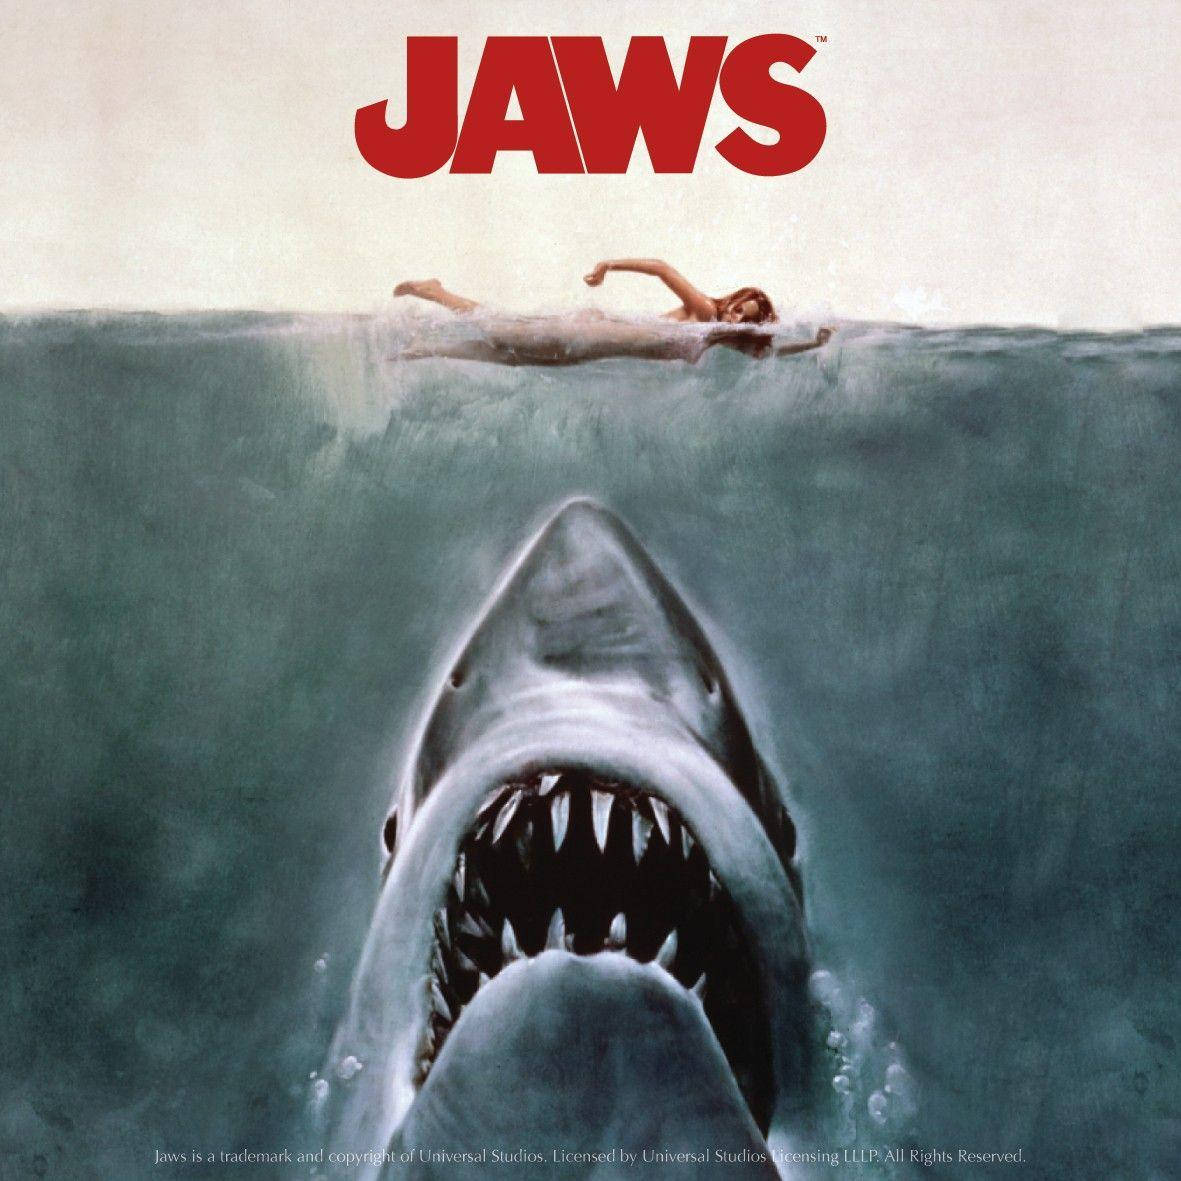 Timeless Movie Poster For The Spielberg Masterpiece 